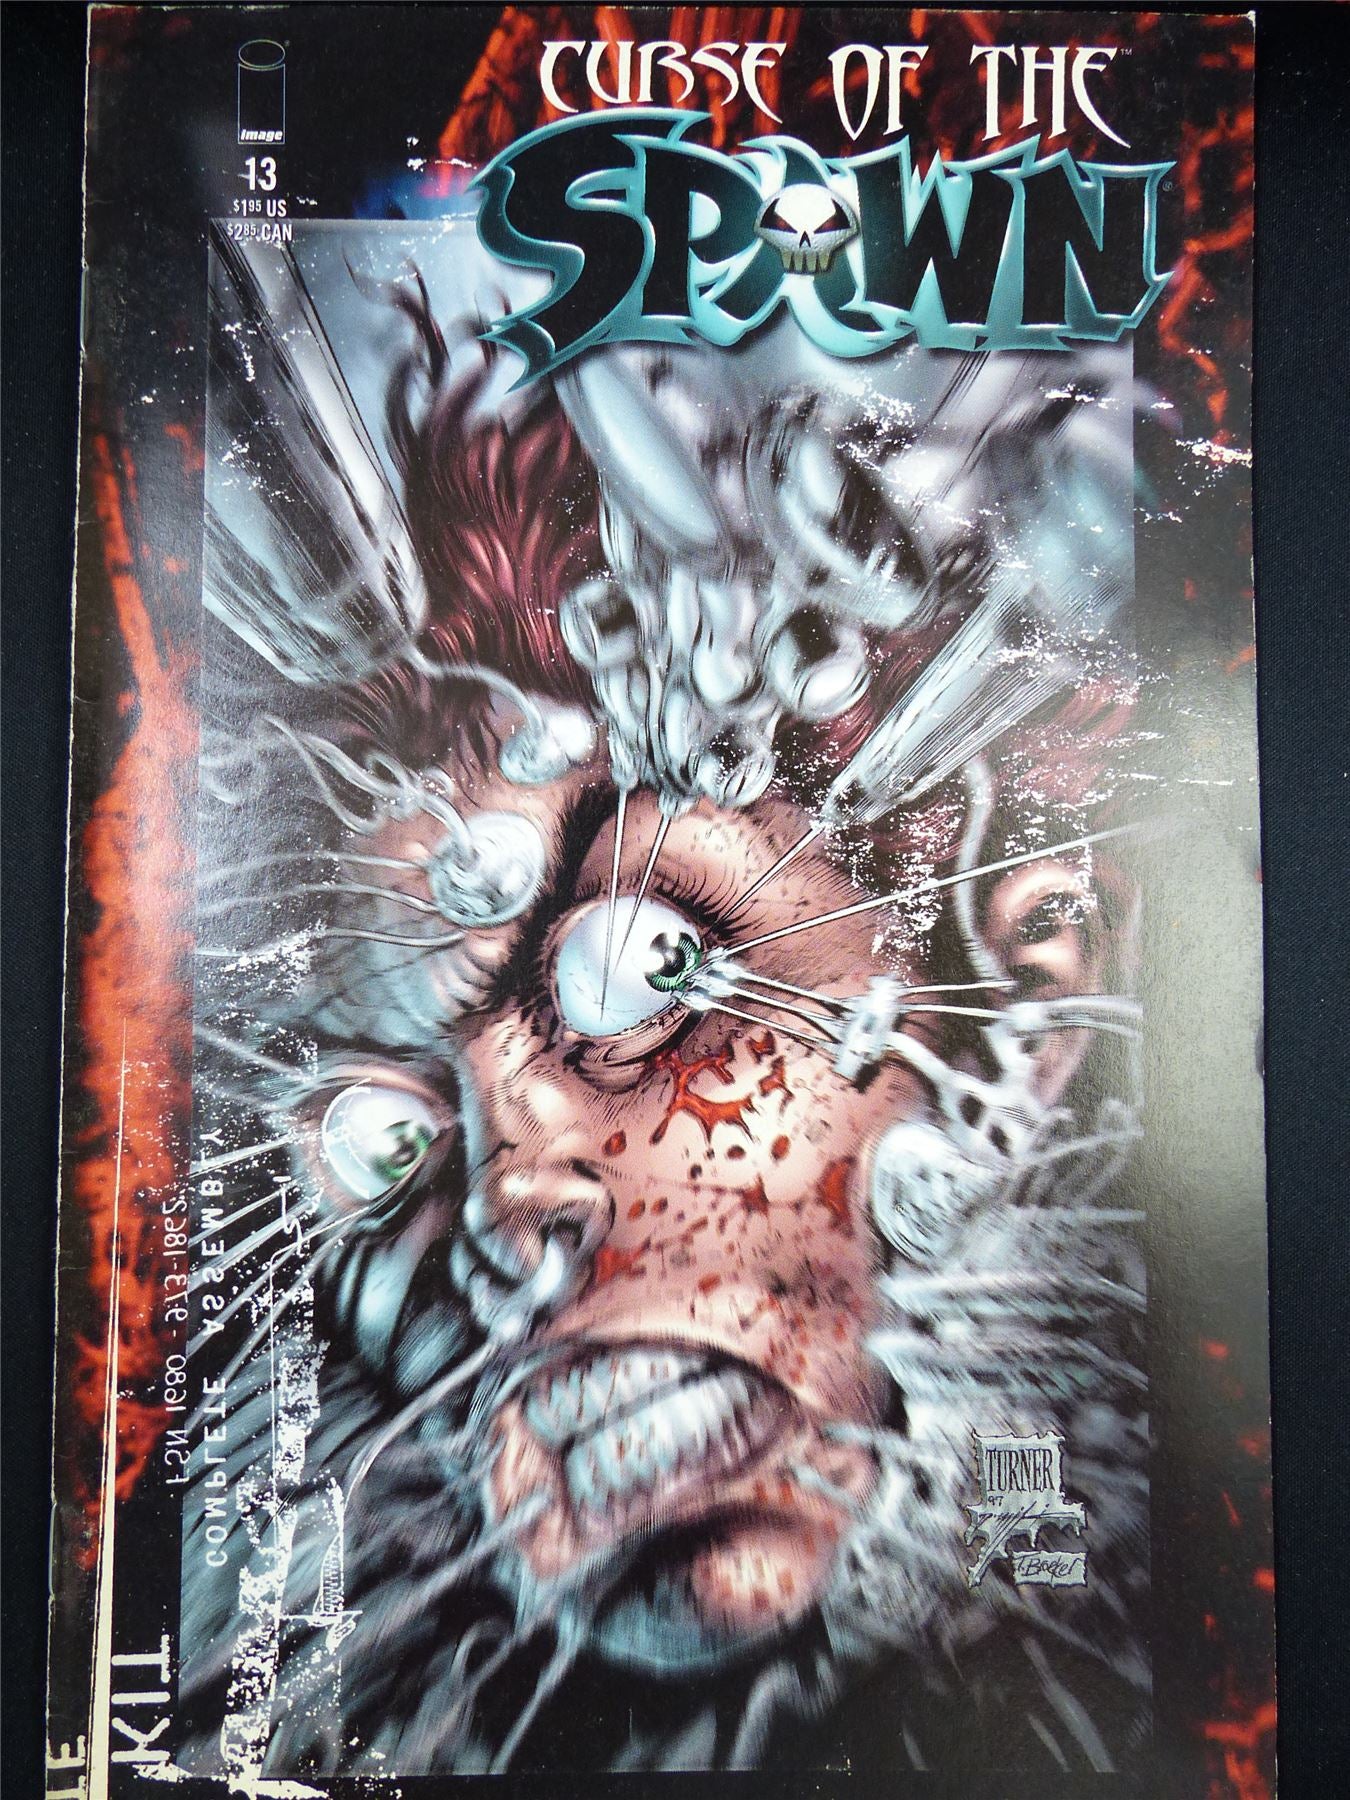 Curse of the SPAWN #13 - Image Comic #1K6